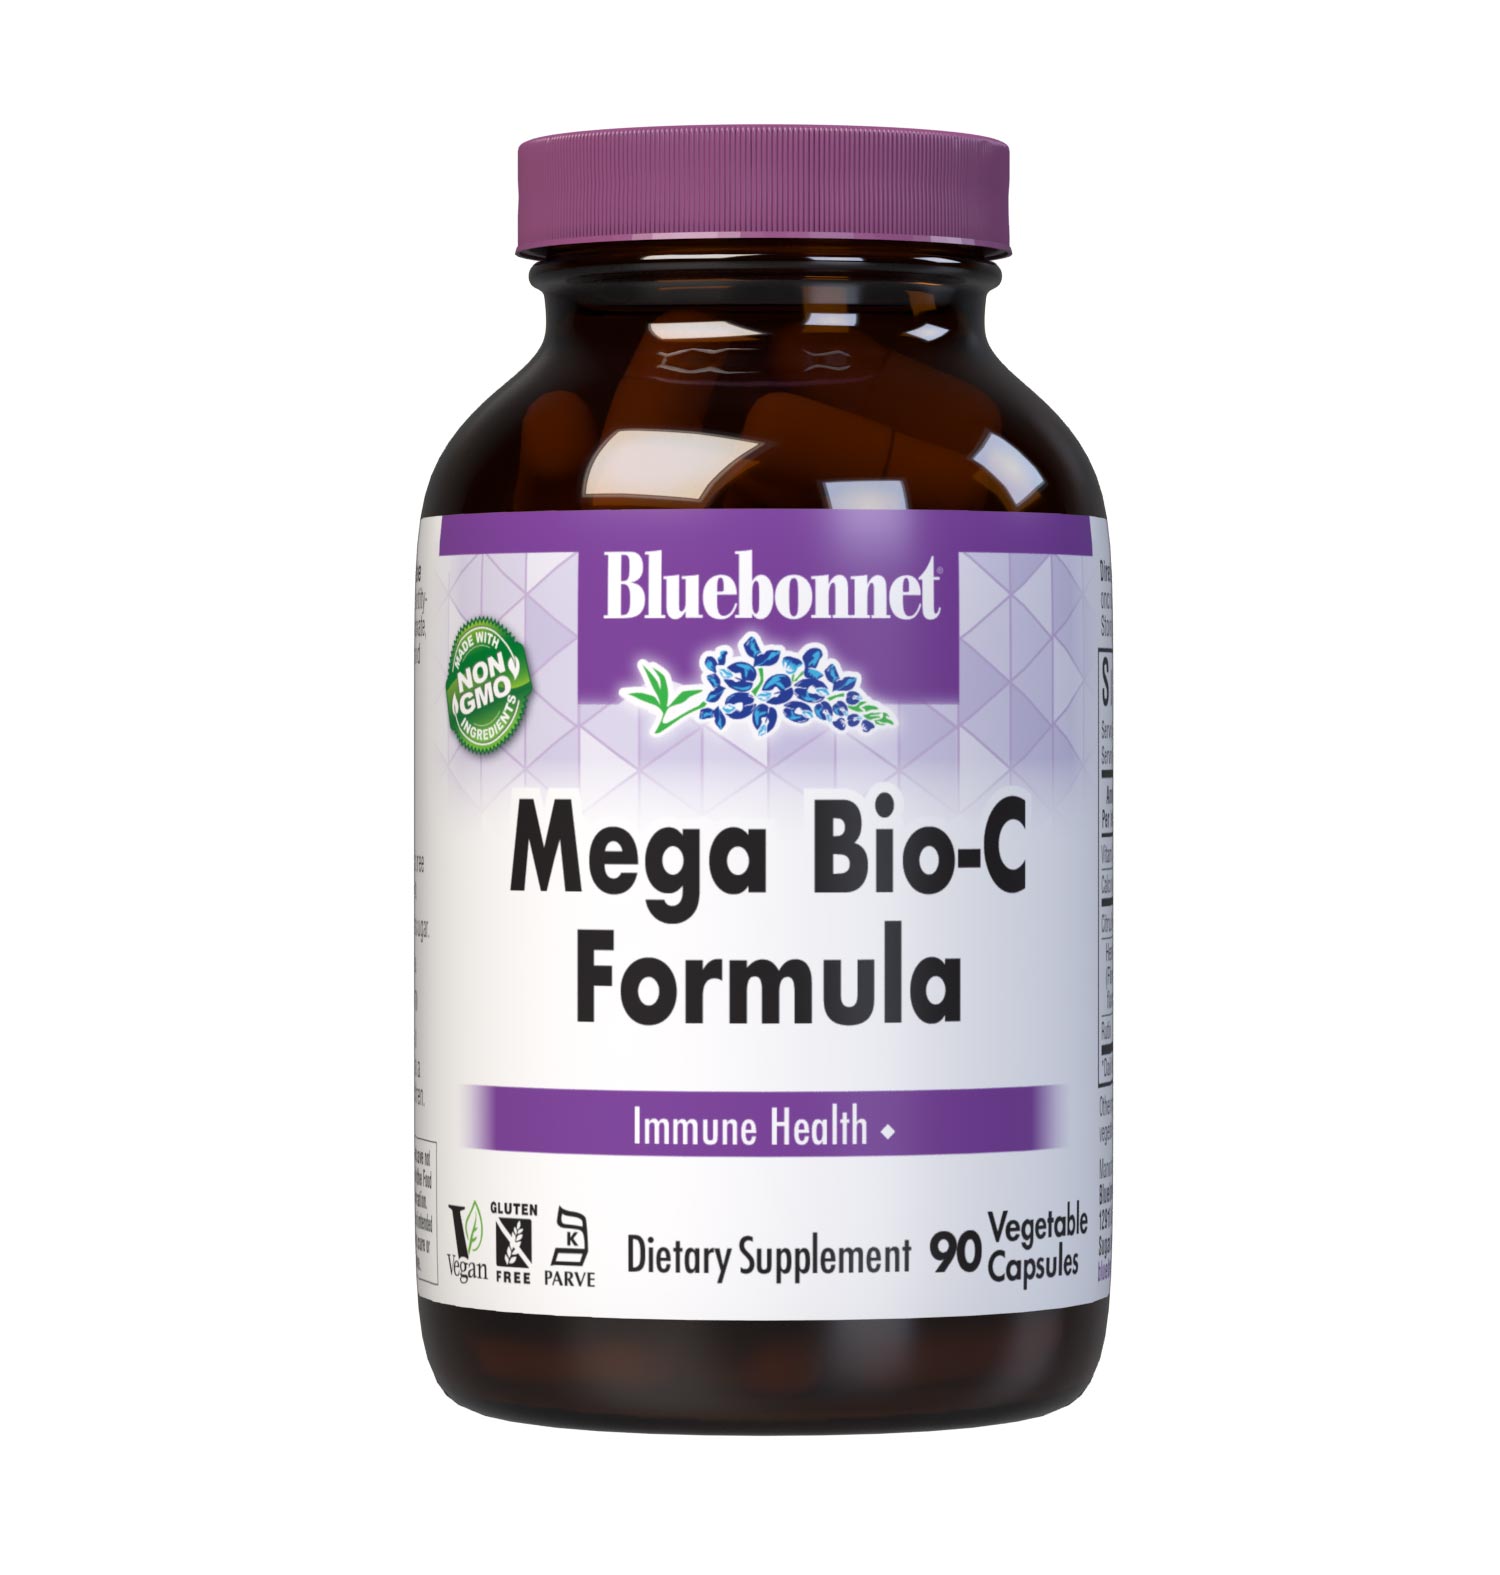 Bluebonnet’s Mega Bio-C Formula 90 Vegetable Capsules are formulated with high potency buffered vitamin C from calcium ascorbate and high potency citrus bioflavonoids complex from oranges, lemons, tangerines, grapefruits and limes plus, hesperidin and rutin for immune health.  #size_90 count